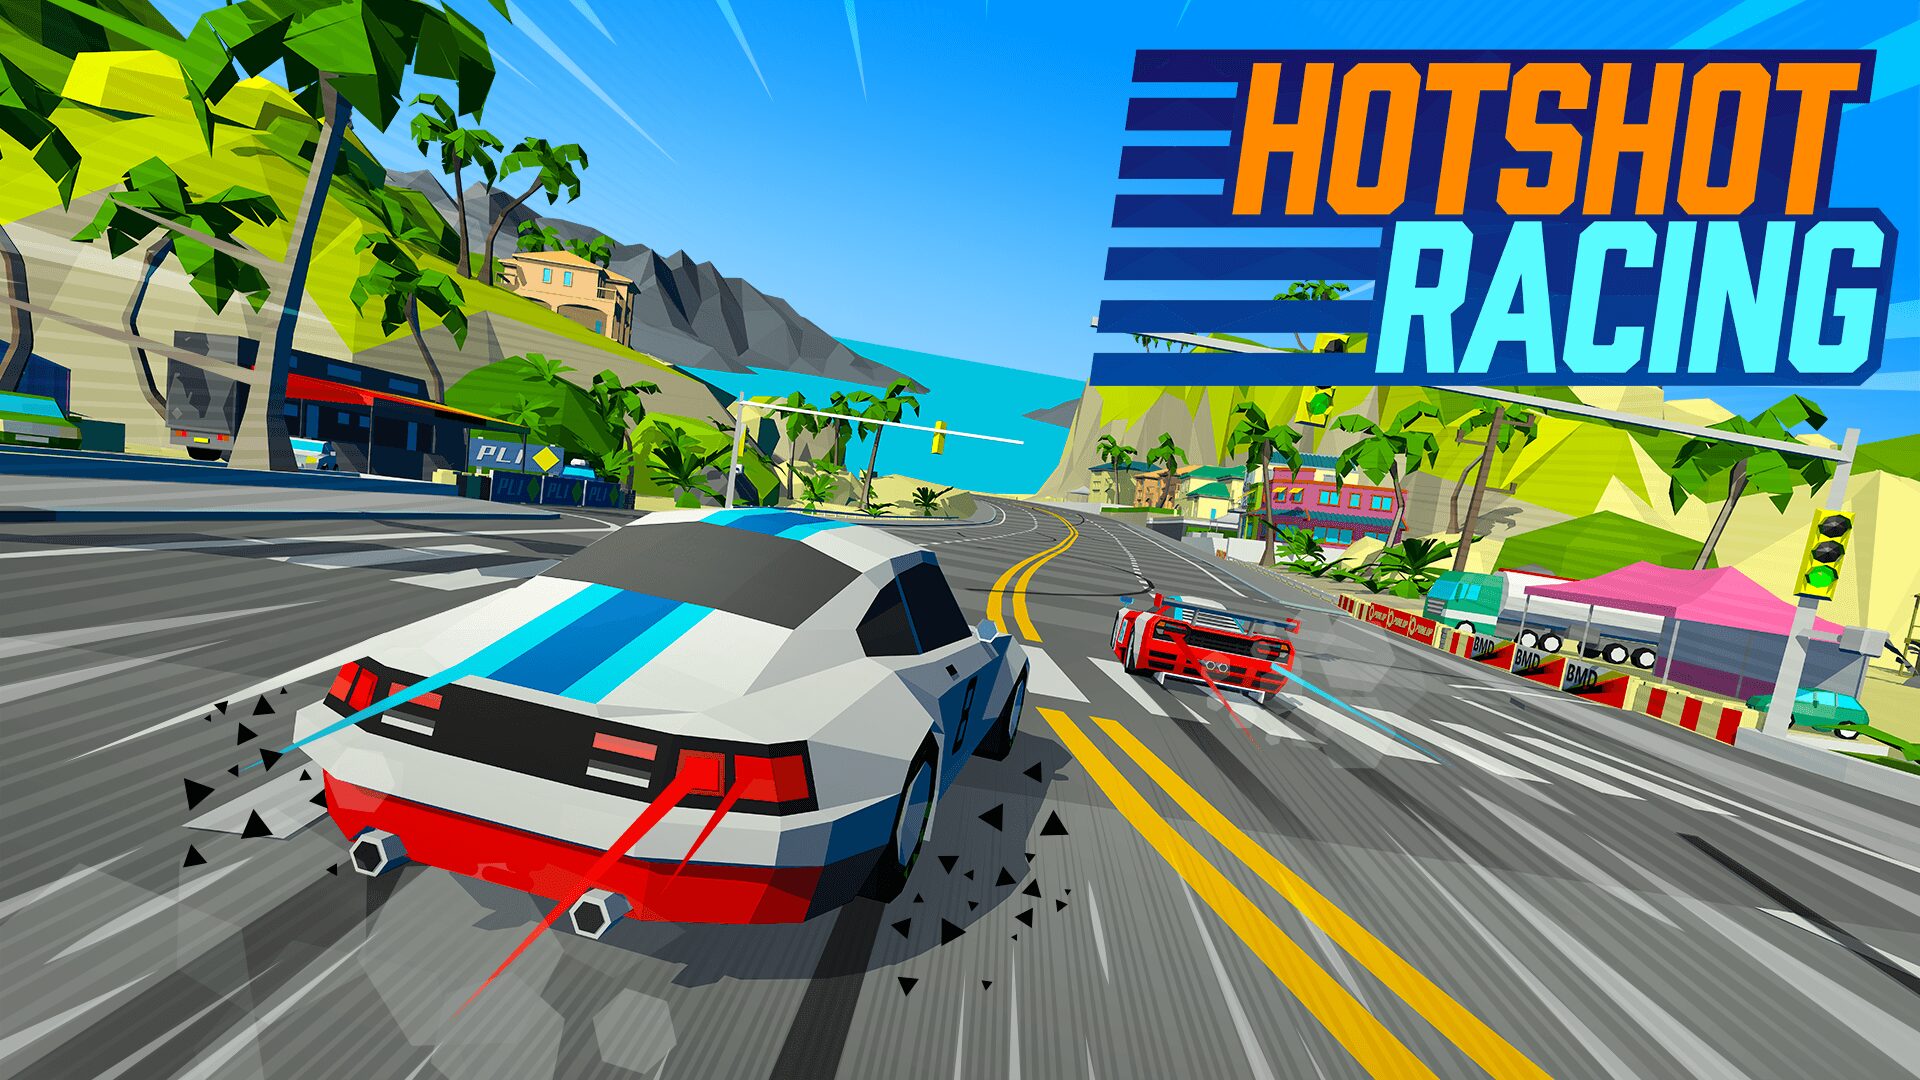 Retro-inspired Racer ‘Hotshot Racing’ coming to PC and Consoles